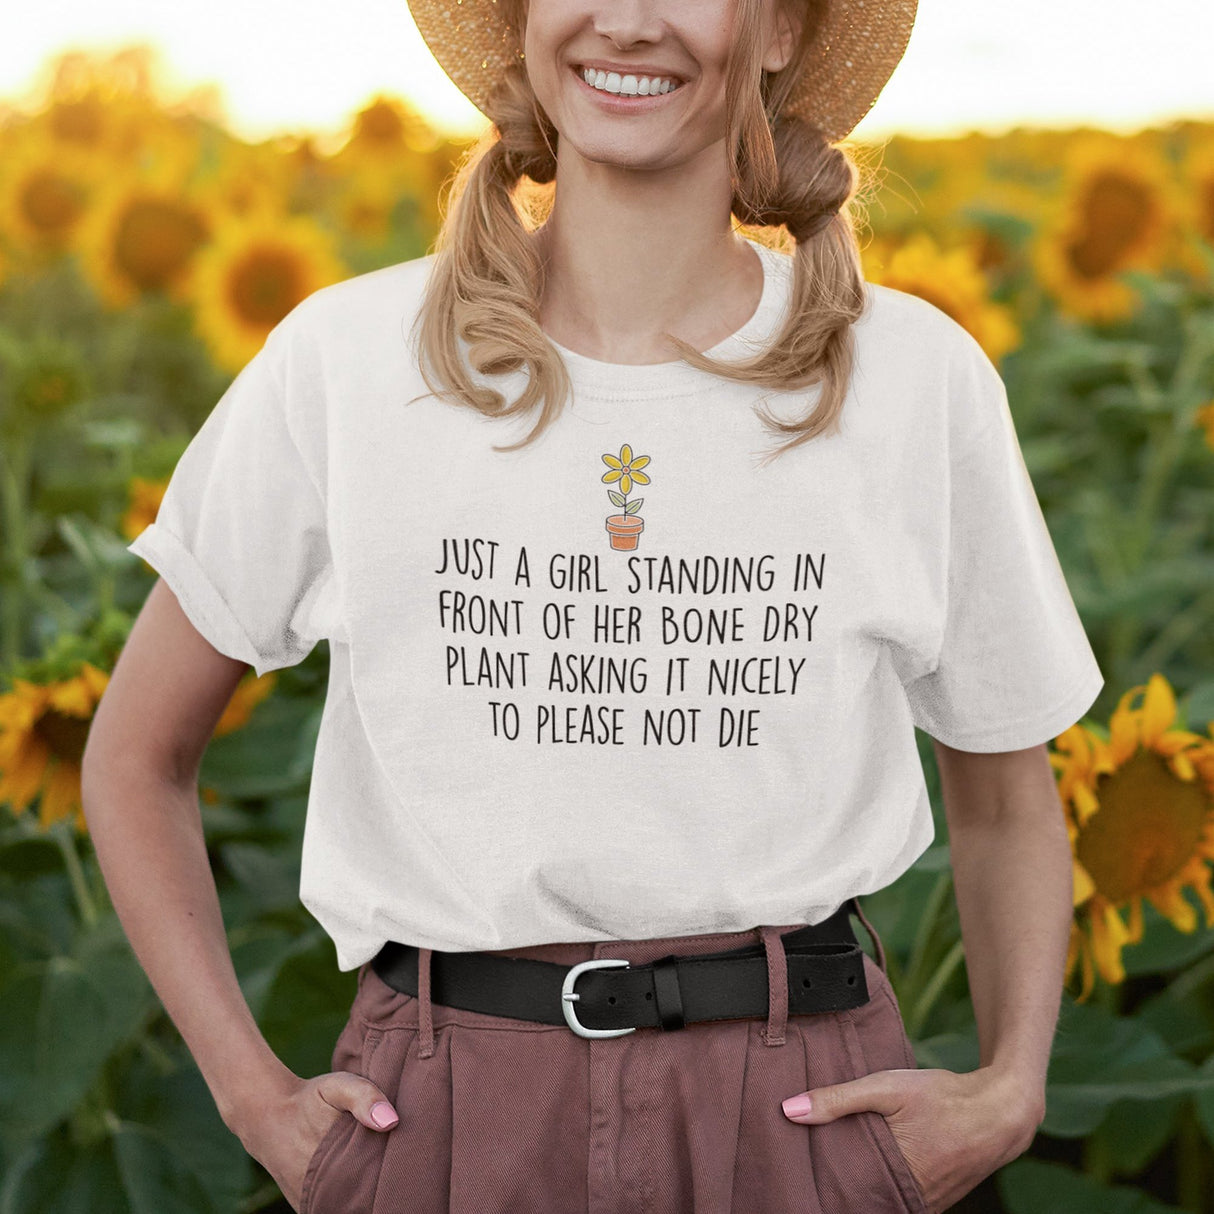 just-a-girl-standing-in-front-of-her-bone-dry-plant-asking-it-nicely-to-please-not-die-girl-tee-plant-t-shirt-bone-tee-life-t-shirt-inspirational-tee#color_white